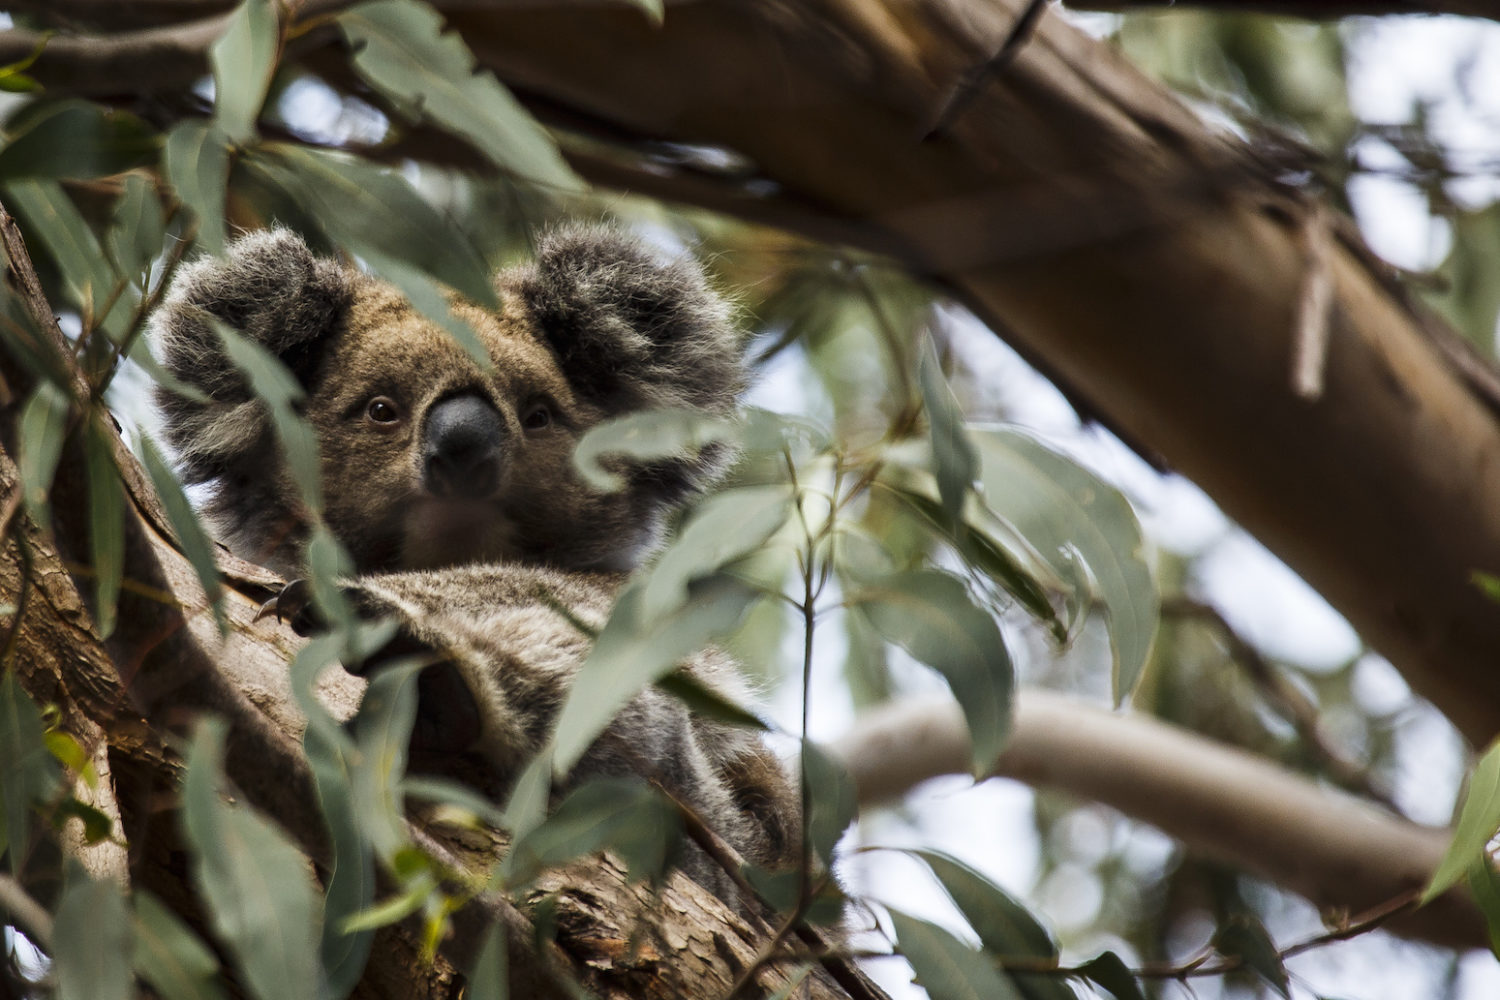 One of the unique and exclusive Australian experiences is seeing a koala on Kangaroo Island